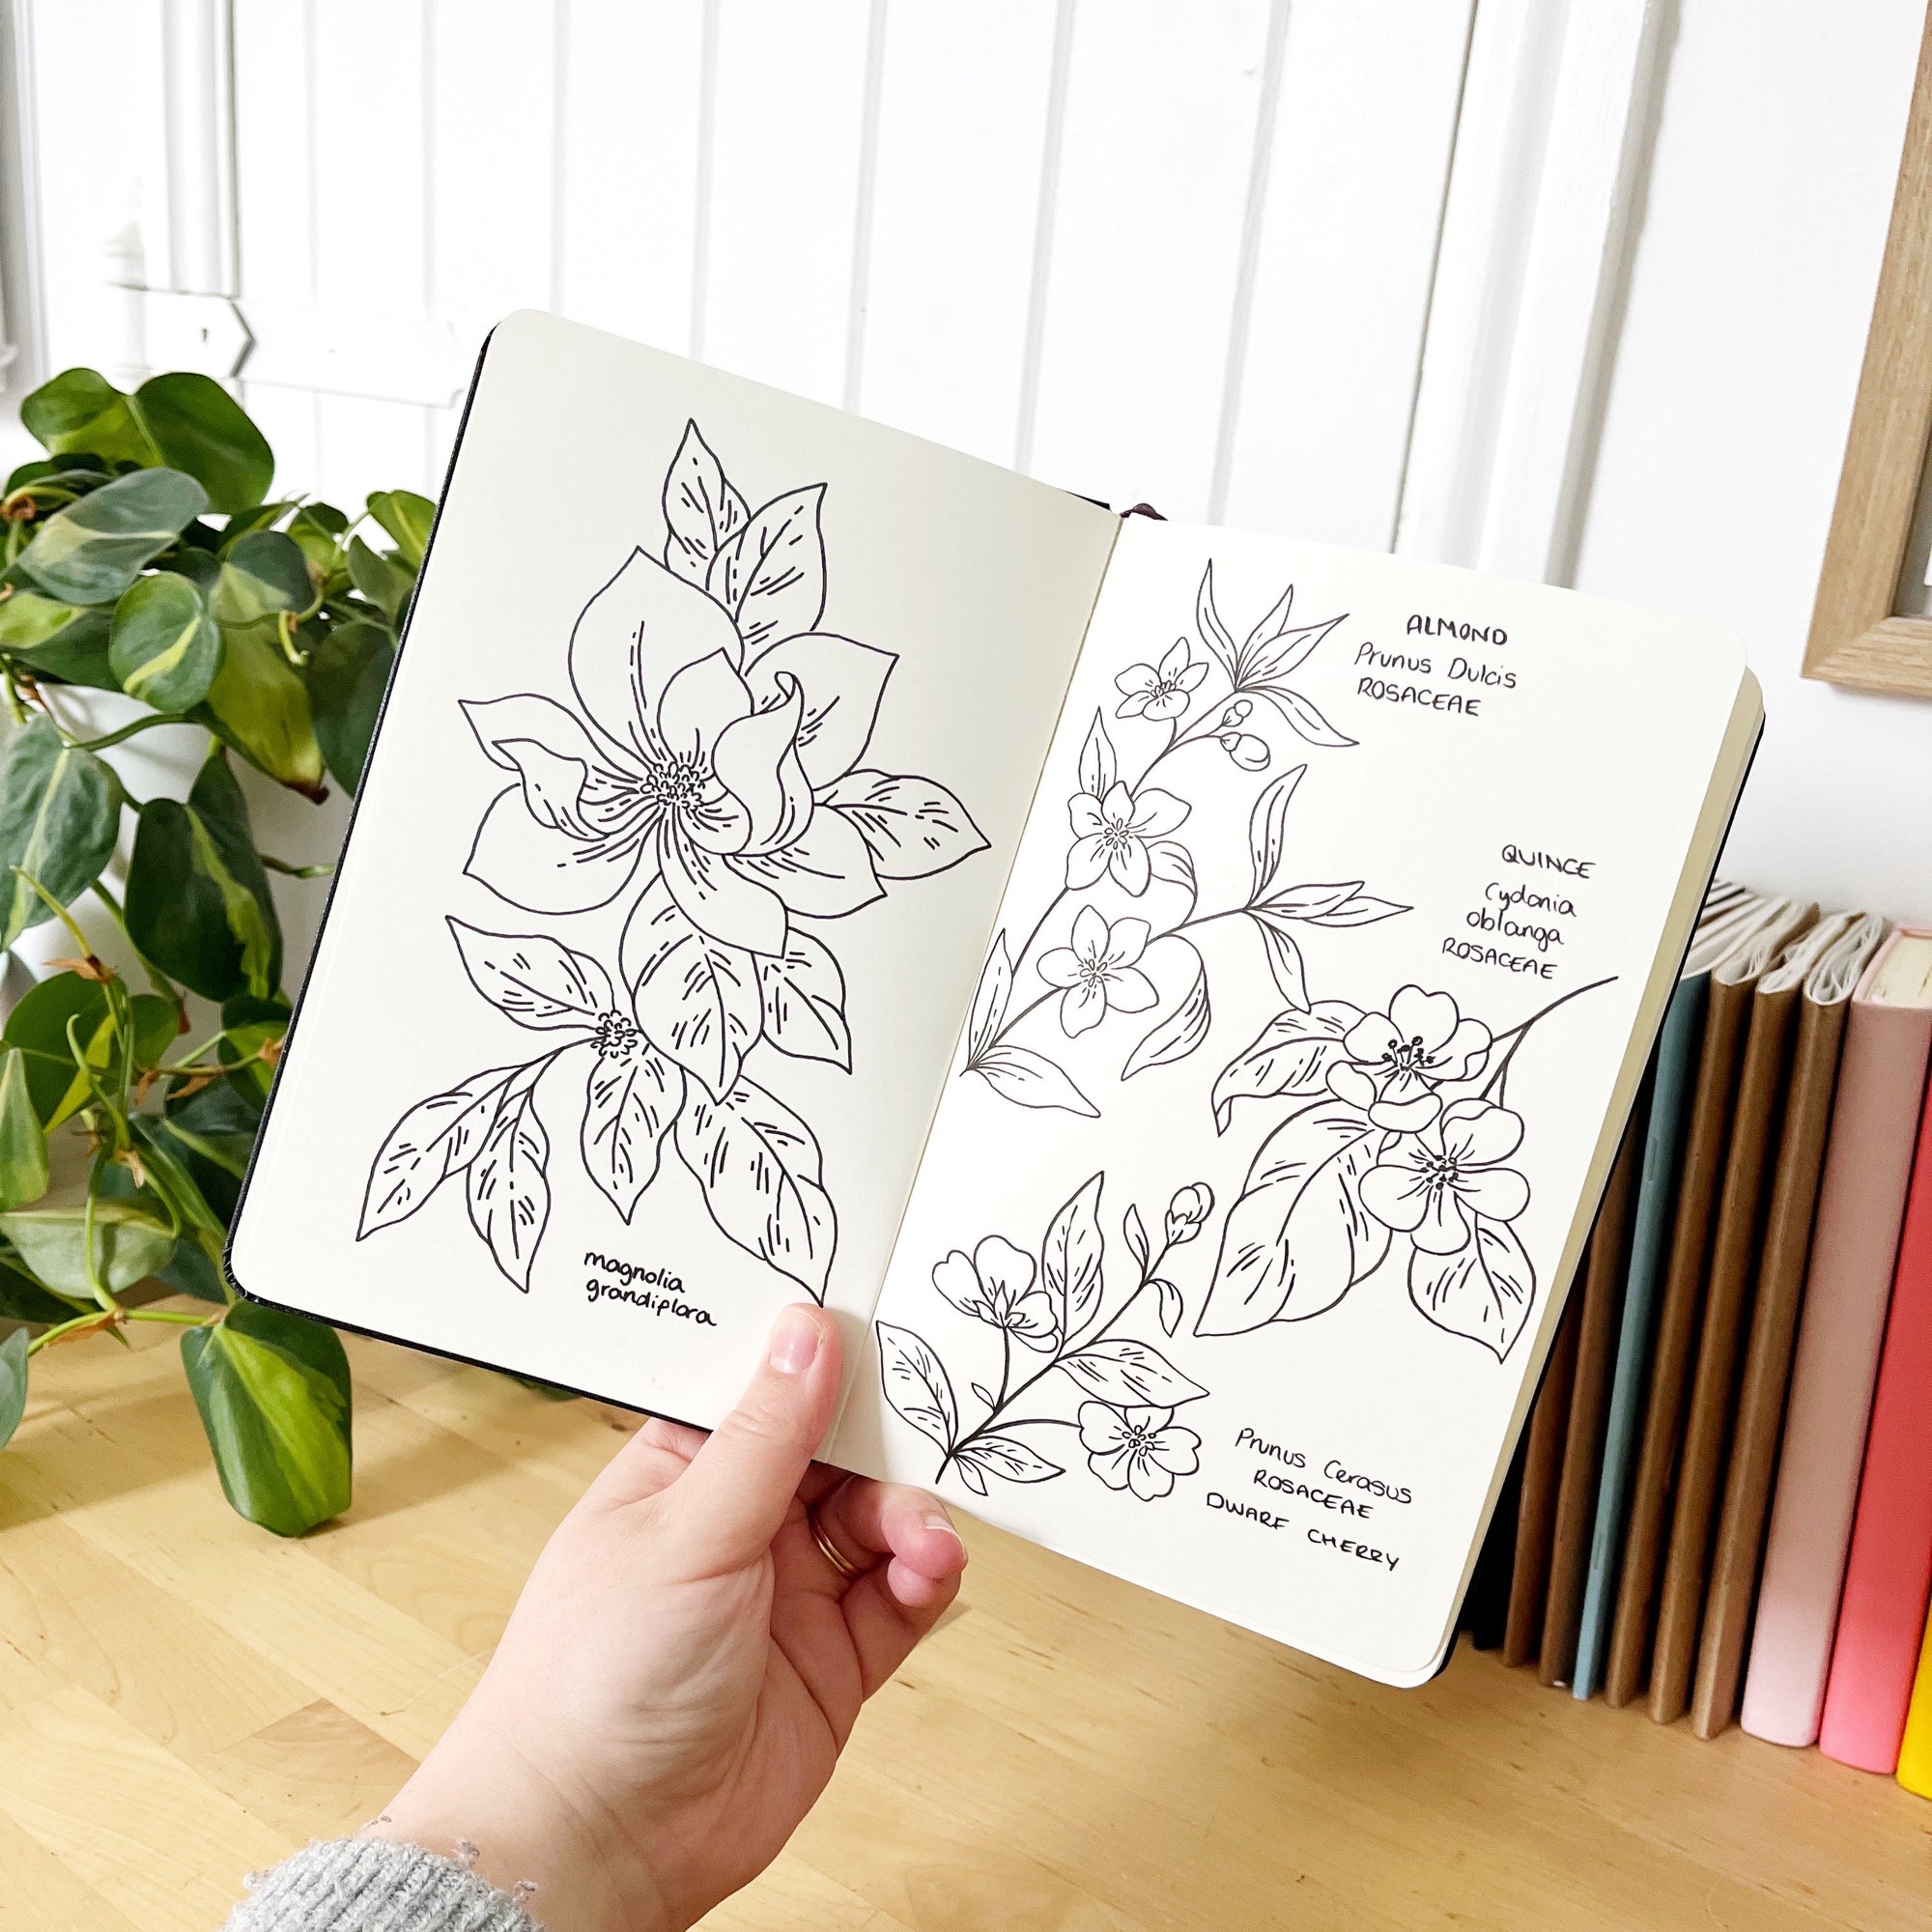 The artist behind our botanical drawing guide